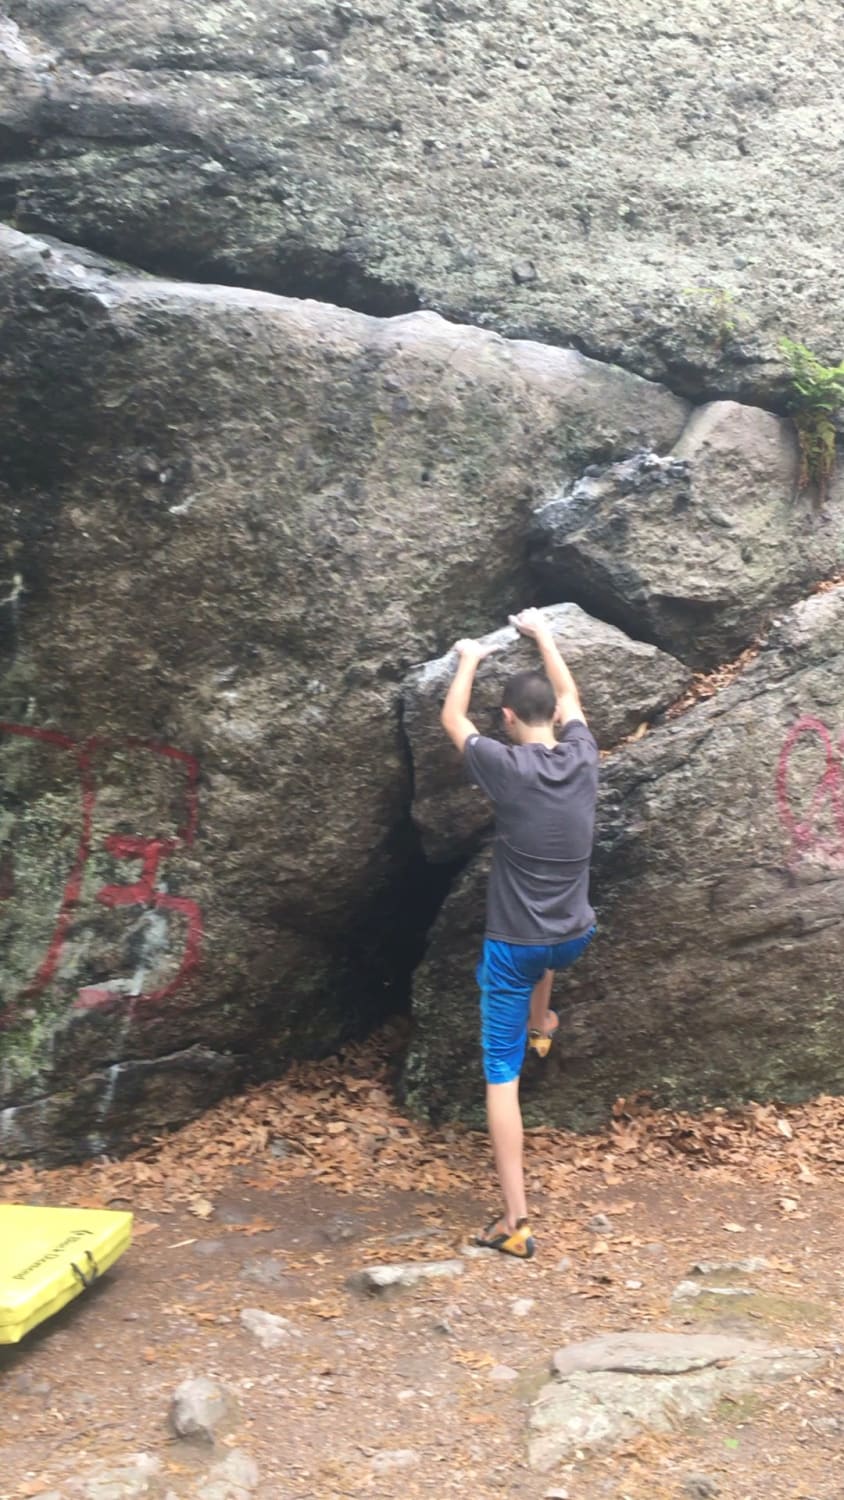 My friends and I just started climbing a few months before quarantine, got outside for the first time a couple of weeks ago. Been real fun! Definitely have some work to do on technique but found some quality V0-V1s outside.